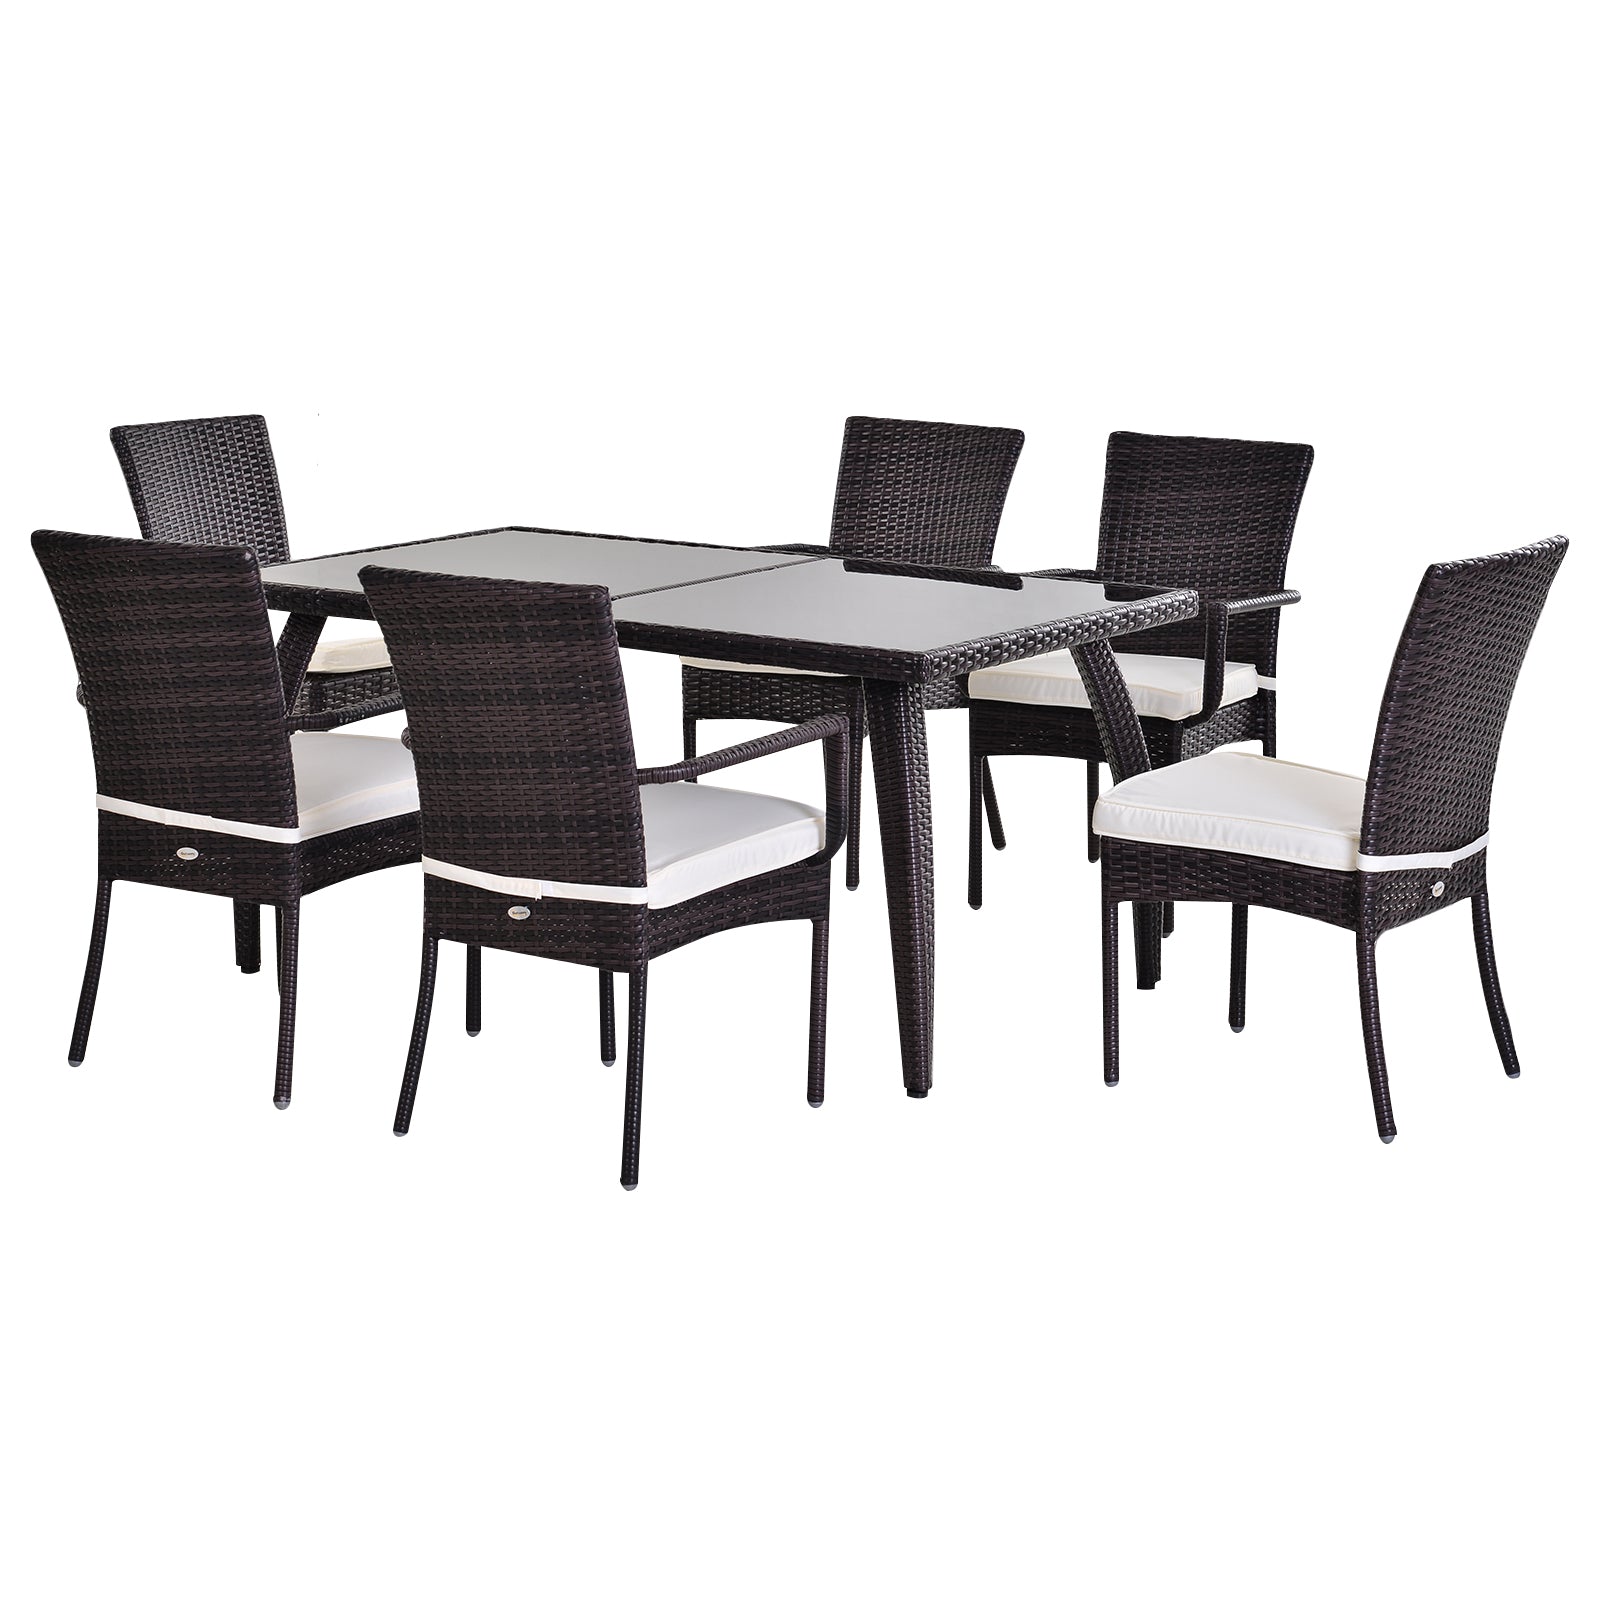 Outsunny 7PC Rattan Dining Set Patio Chair Glass Top Table Wicker Furniture  | TJ Hughes